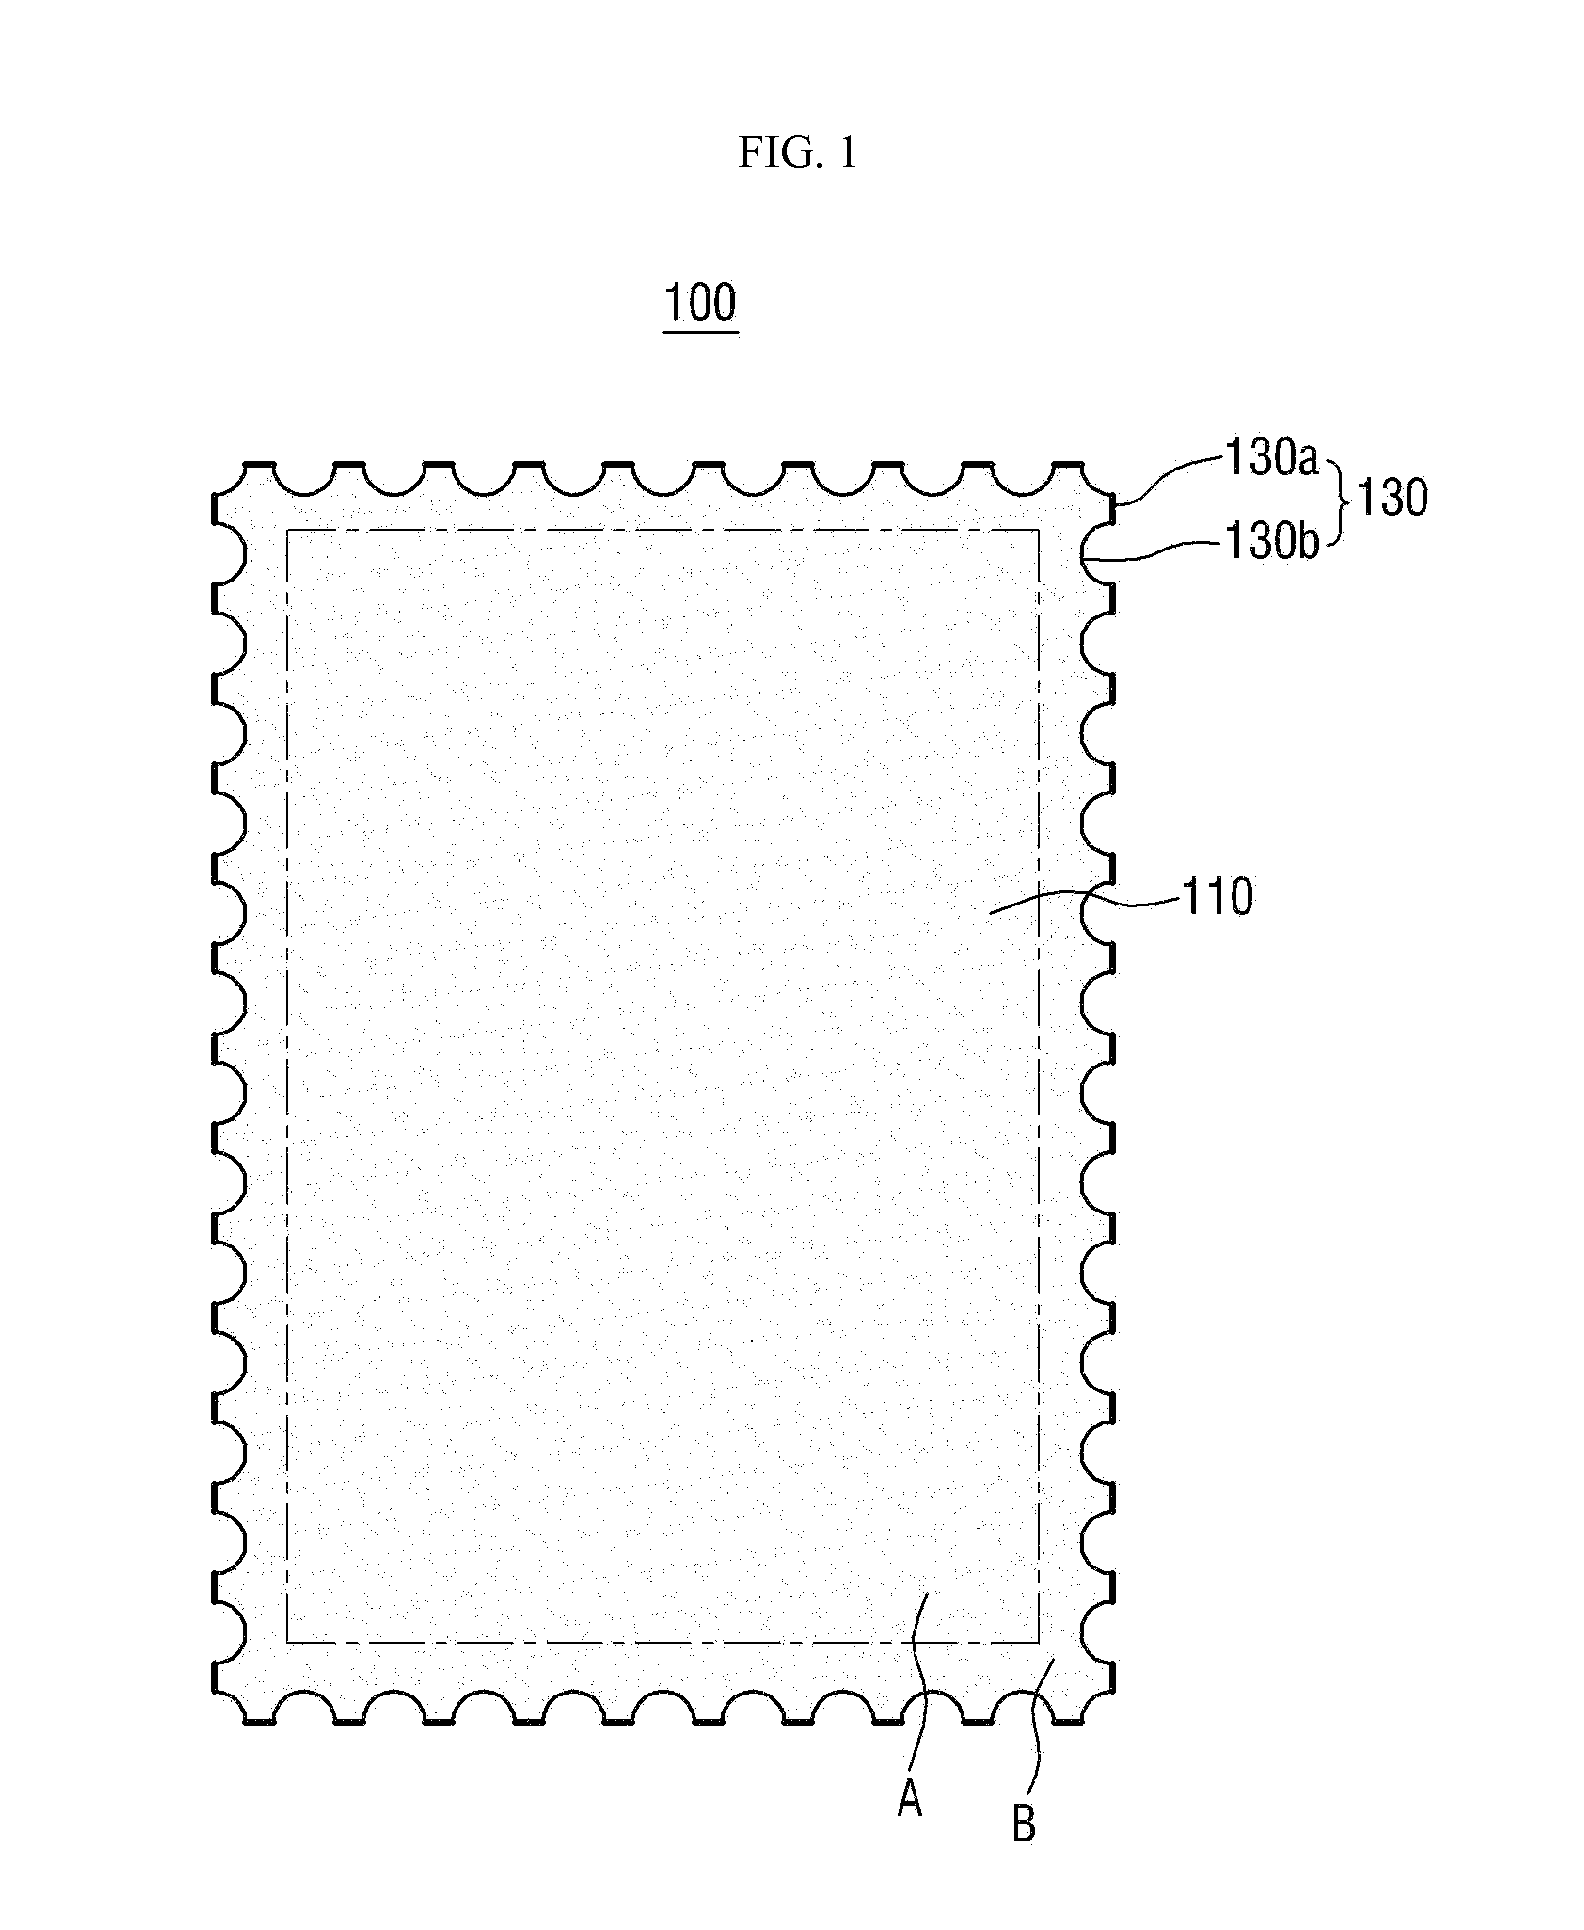 Display device substrate, display device, and related fabrication method